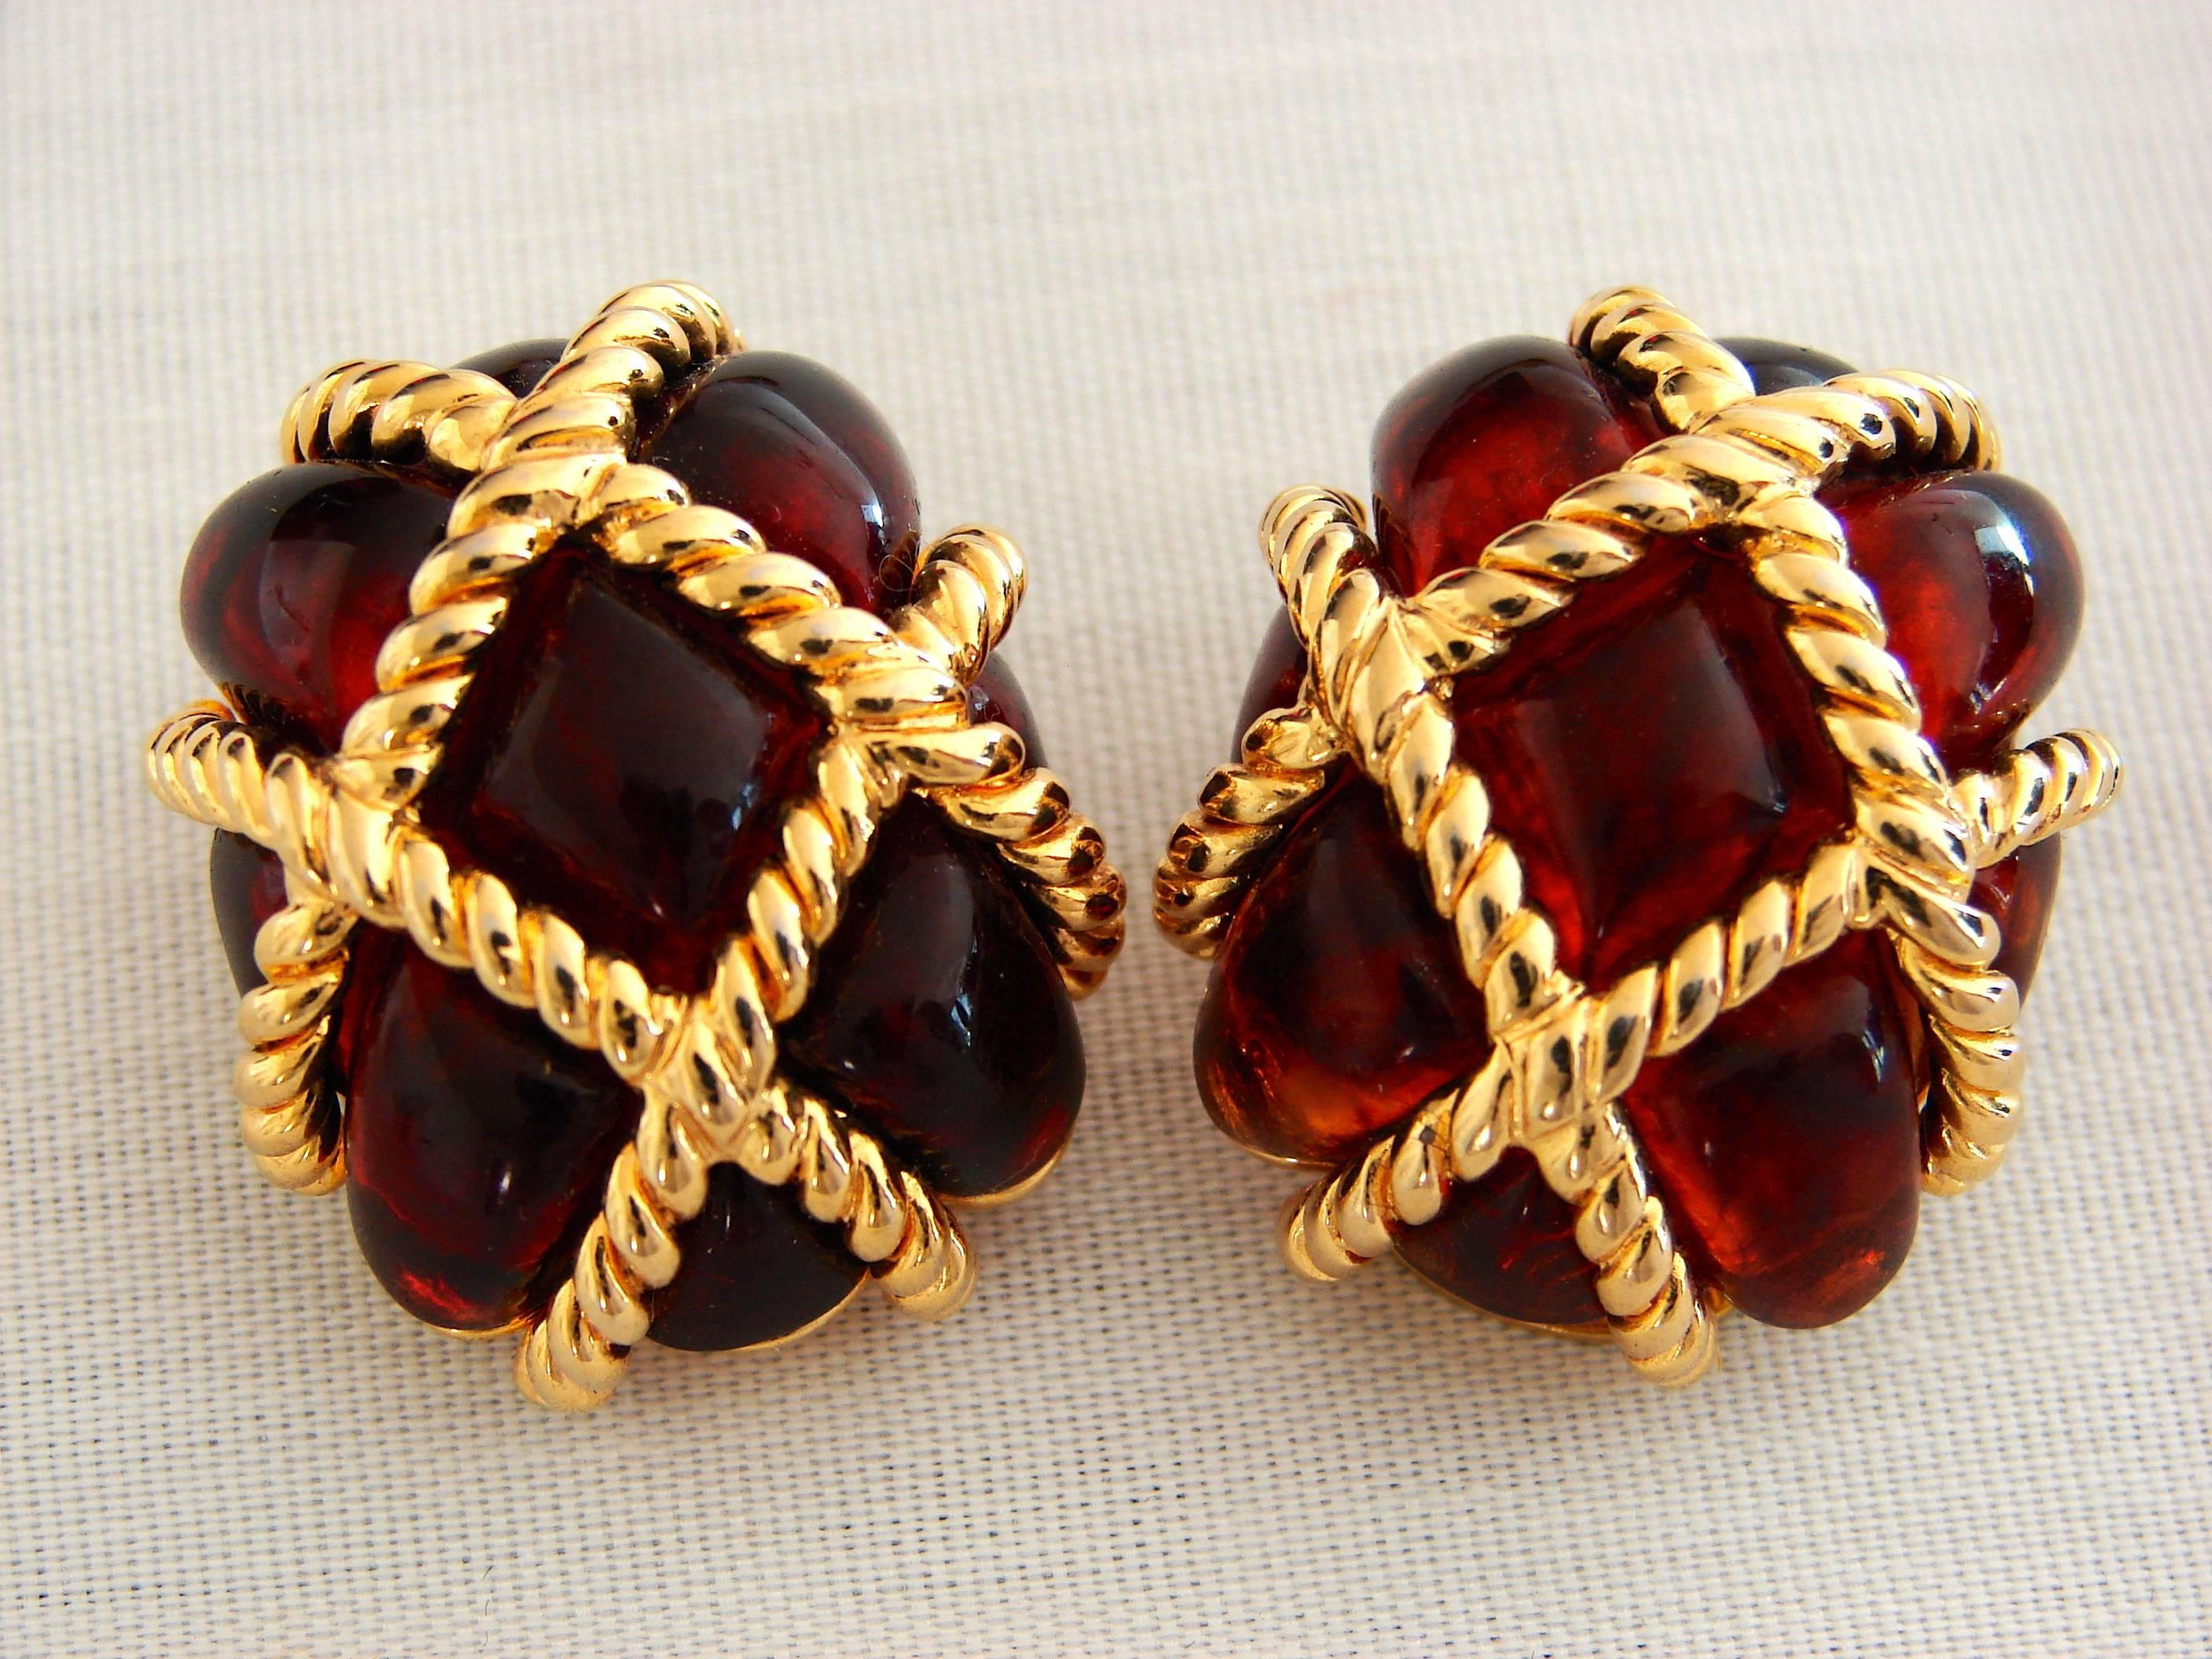 Lovely clip earrings from Kenneth Jay Lane.  In excellent condition and measure approximately 1